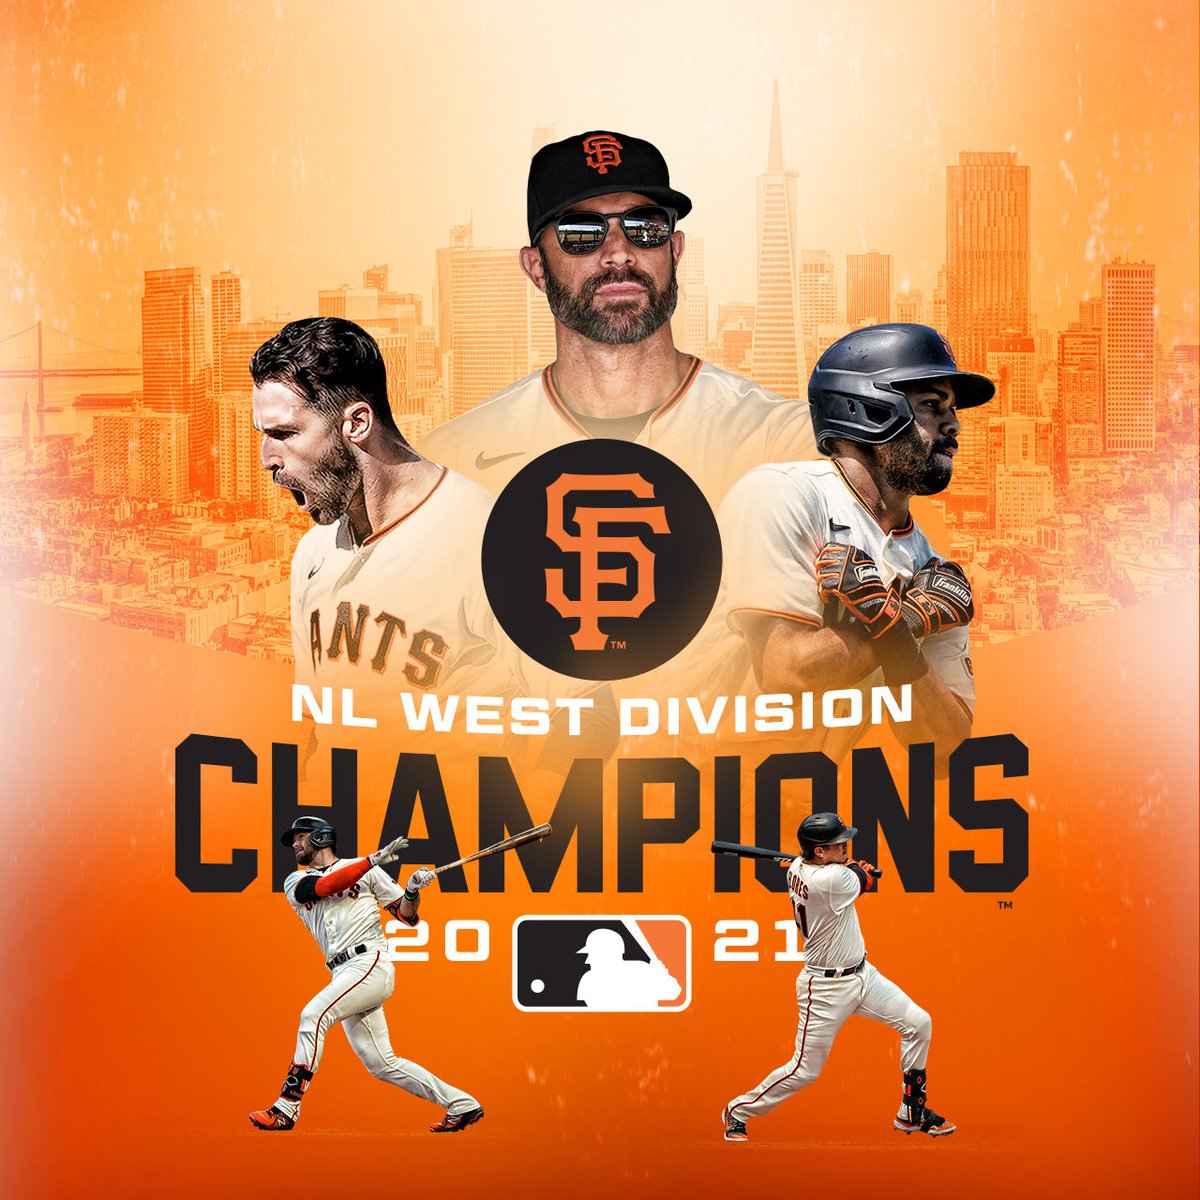 My San Francisco Giants are 2021 NL West Champions by